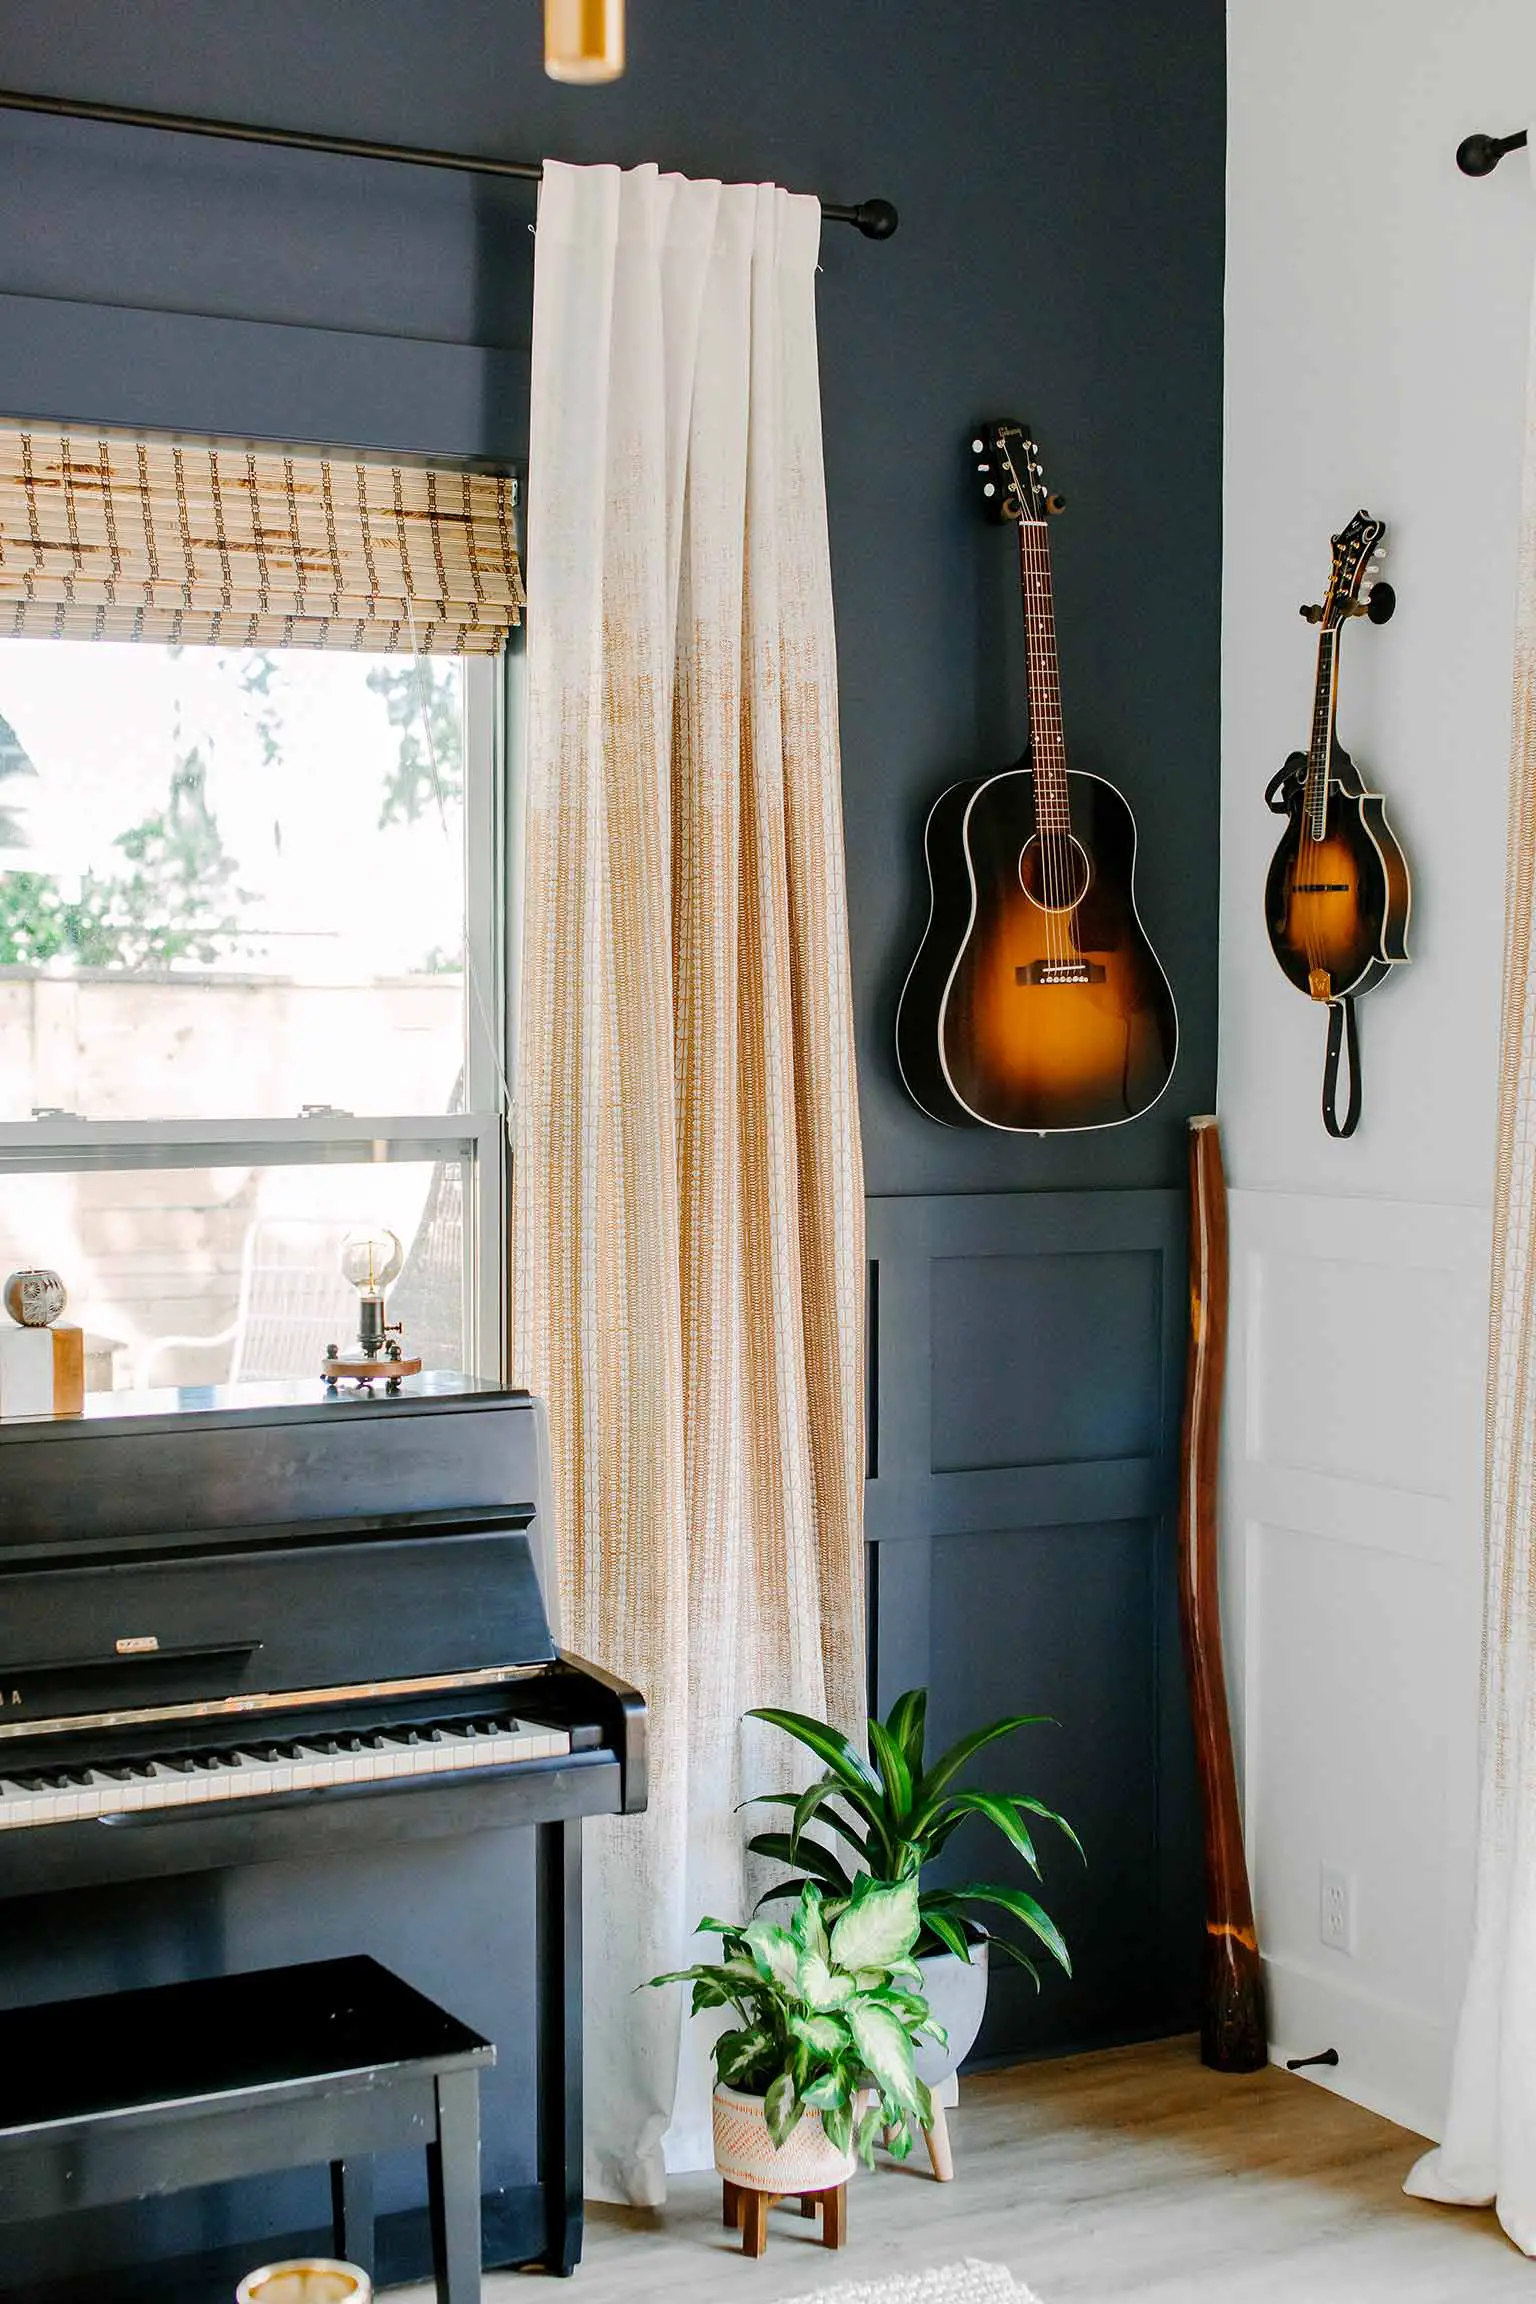 Hanging guitar and mandolin - The Guest House Reveal - That Homebird Life Blog